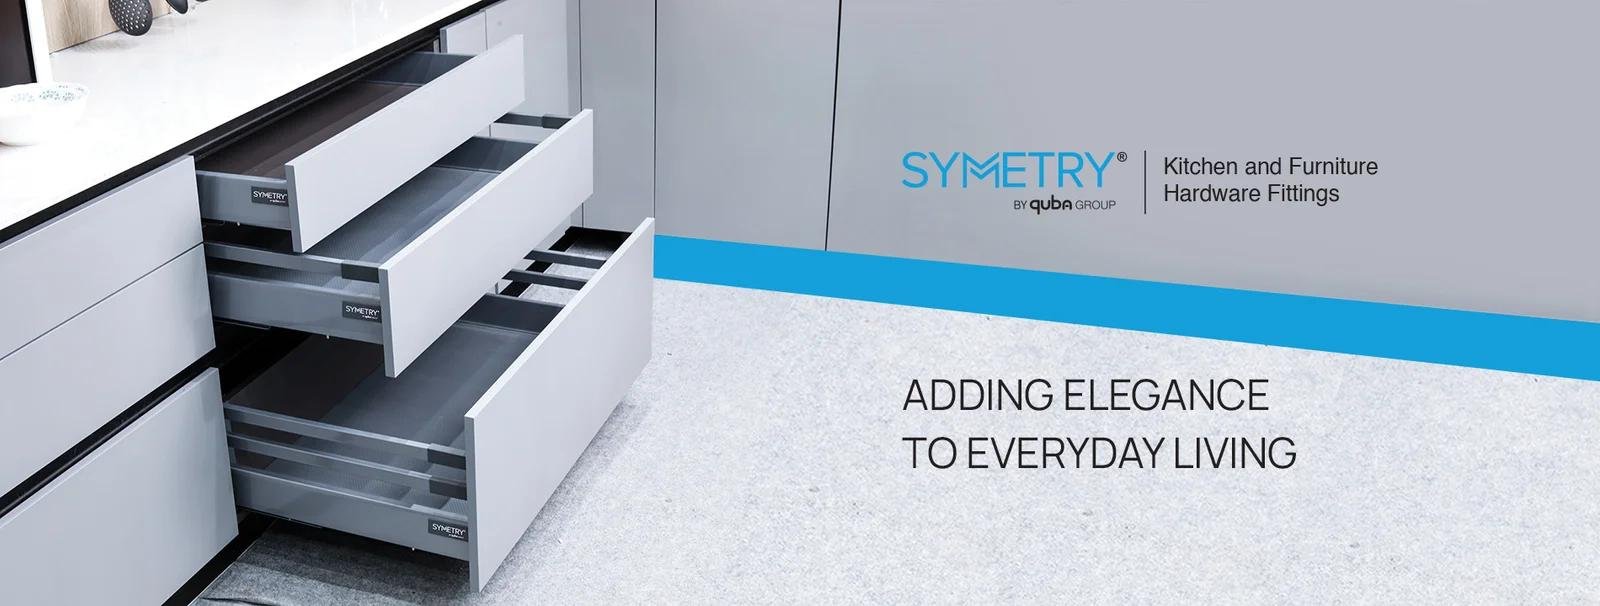 Symetry Furniture Fittings Banner